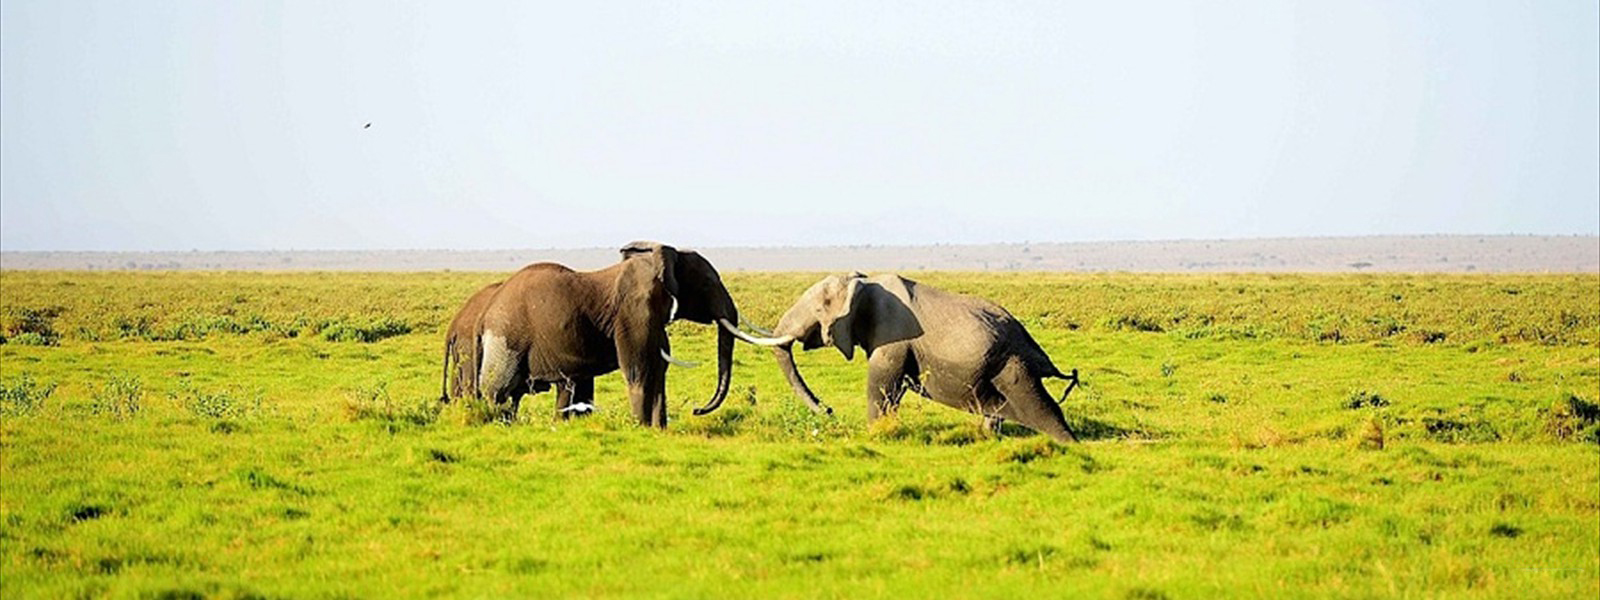 AMBOSELI NATIONAL PARK ATTRACTIONS, AMBOSELI NATIONAL PARK LODGES, LODGES IN AMBOSELI, ACTIVITIES AMBOSELI NATIONAL PARK, AMBOSELI NATIONAL PARK ACTIVITIES, BEST OFFERS, RATES, DISCOUNTS, PRICE, AMBOSELI ELEPHANTS, AMBOSELI, ATTRACTIONS, ACTIVITIES, WHERE TO STAY, WHAT TO DO AMBOSELI NATIONAL PARK, WHERE TO STAY AMBOSELI NATIONAL PARK, AMBOSELI NATIONAL PARK WHAT TO DO, SERENA LODGE AMBOSELI, KIBO VILLA LODGE, TAWI LODGE AMBOSELI, SOPA LODGE AMBOSELI, KIBO SAFARI CAMP, AMBOSELI SERNTRIM LODGE, AMBOSELI NATIONAL PARK WHERE TO STAY, AMBOSELI NATIONAL RESERVE, BALLOON SAFARIS, LODGES, HOTELS, BIRD WATCHING, GAME DRIVES, 